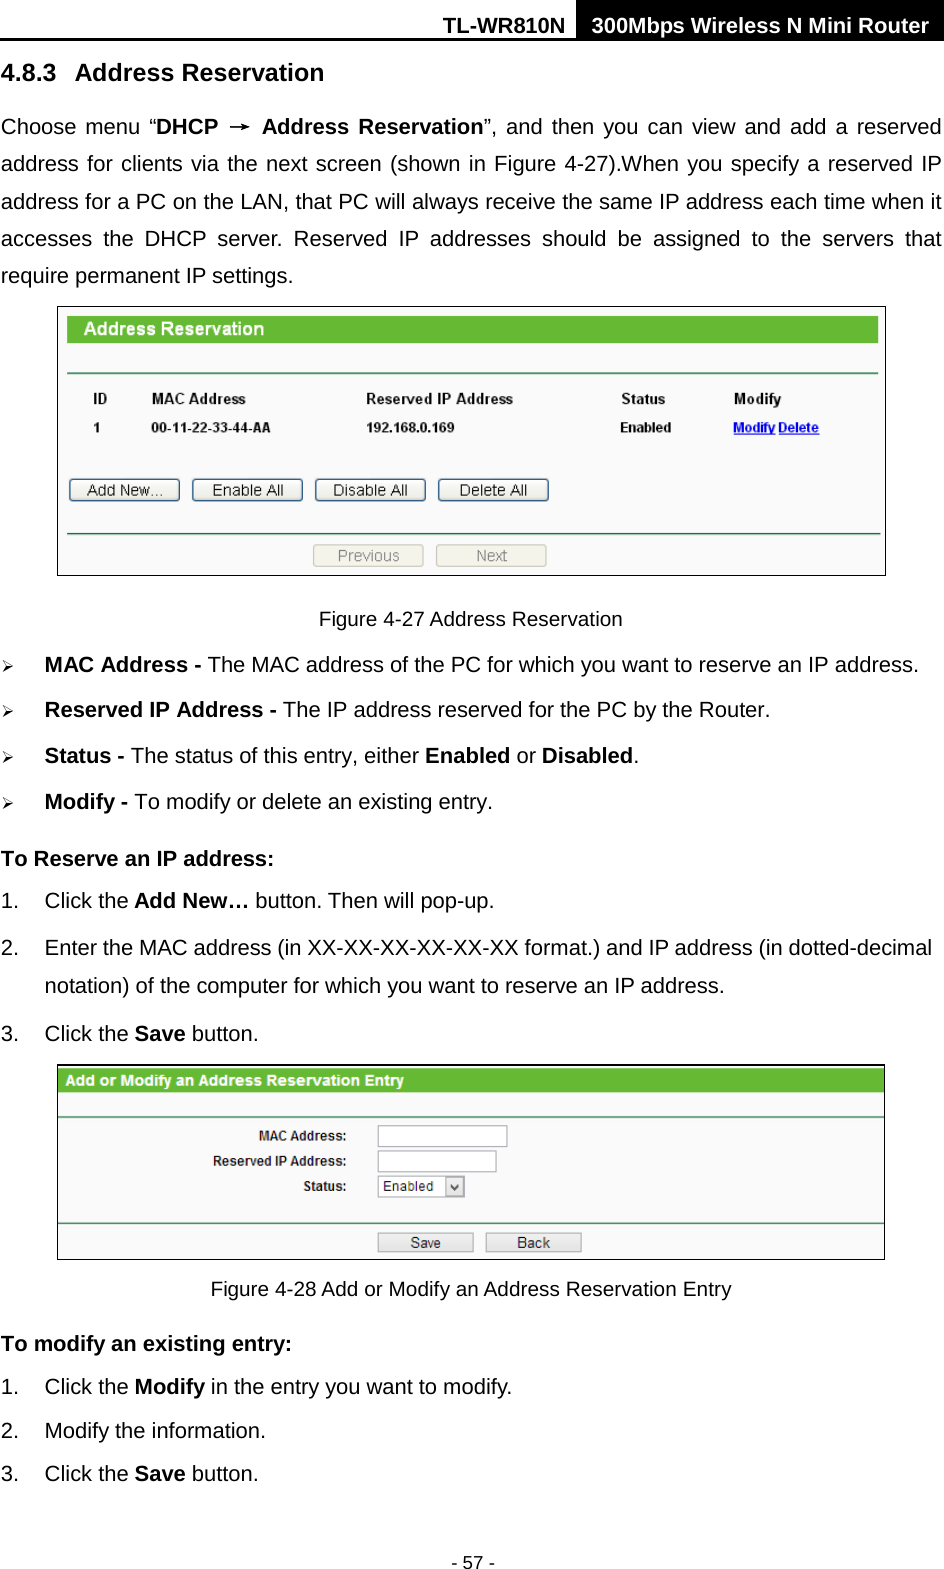 TL-WR810N 300Mbps Wireless N Mini Router  - 57 - 4.8.3 Address Reservation Choose menu “DHCP → Address Reservation”, and then you can view and add a reserved address for clients via the next screen (shown in Figure 4-27).When you specify a reserved IP address for a PC on the LAN, that PC will always receive the same IP address each time when it accesses the DHCP server. Reserved IP addresses should be assigned to the  servers  that require permanent IP settings.    Figure 4-27 Address Reservation  MAC Address - The MAC address of the PC for which you want to reserve an IP address.  Reserved IP Address - The IP address reserved for the PC by the Router.  Status - The status of this entry, either Enabled or Disabled.  Modify - To modify or delete an existing entry. To Reserve an IP address:   1. Click the Add New… button. Then will pop-up. 2. Enter the MAC address (in XX-XX-XX-XX-XX-XX format.) and IP address (in dotted-decimal notation) of the computer for which you want to reserve an IP address.   3. Click the Save button.    Figure 4-28 Add or Modify an Address Reservation Entry To modify an existing entry: 1. Click the Modify in the entry you want to modify. 2. Modify the information.   3. Click the Save button. 